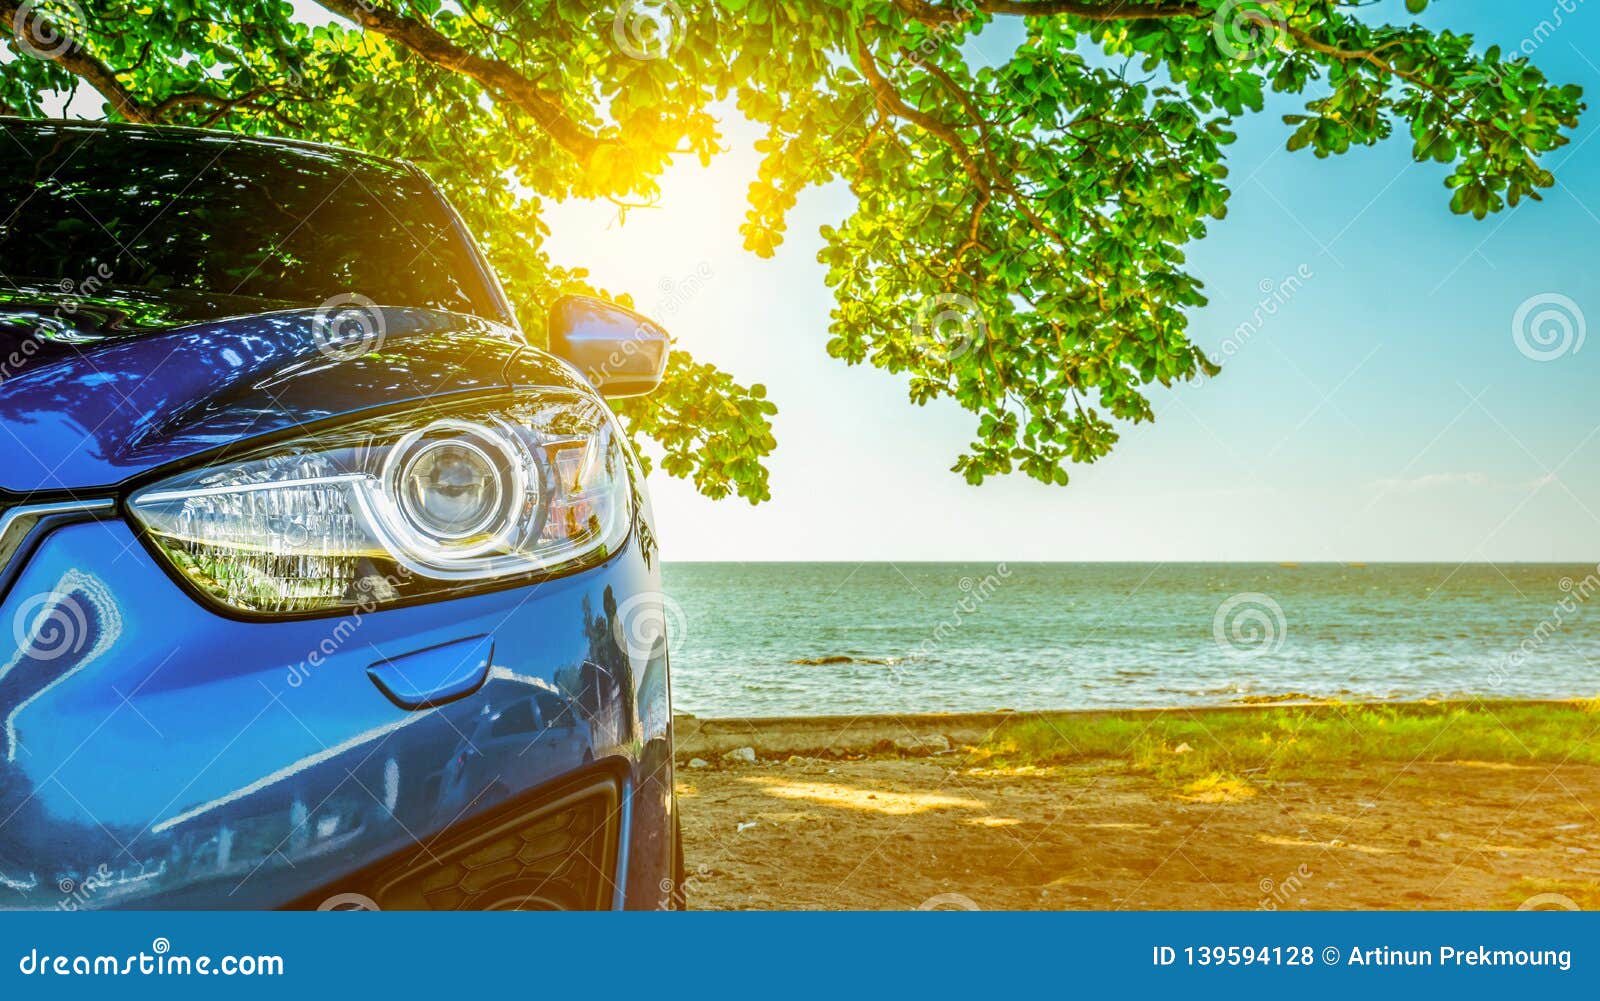 blue sport suv car parked by the tropical sea under umbrella tree. summer vacation at the beach. summer travel by car. road trip.